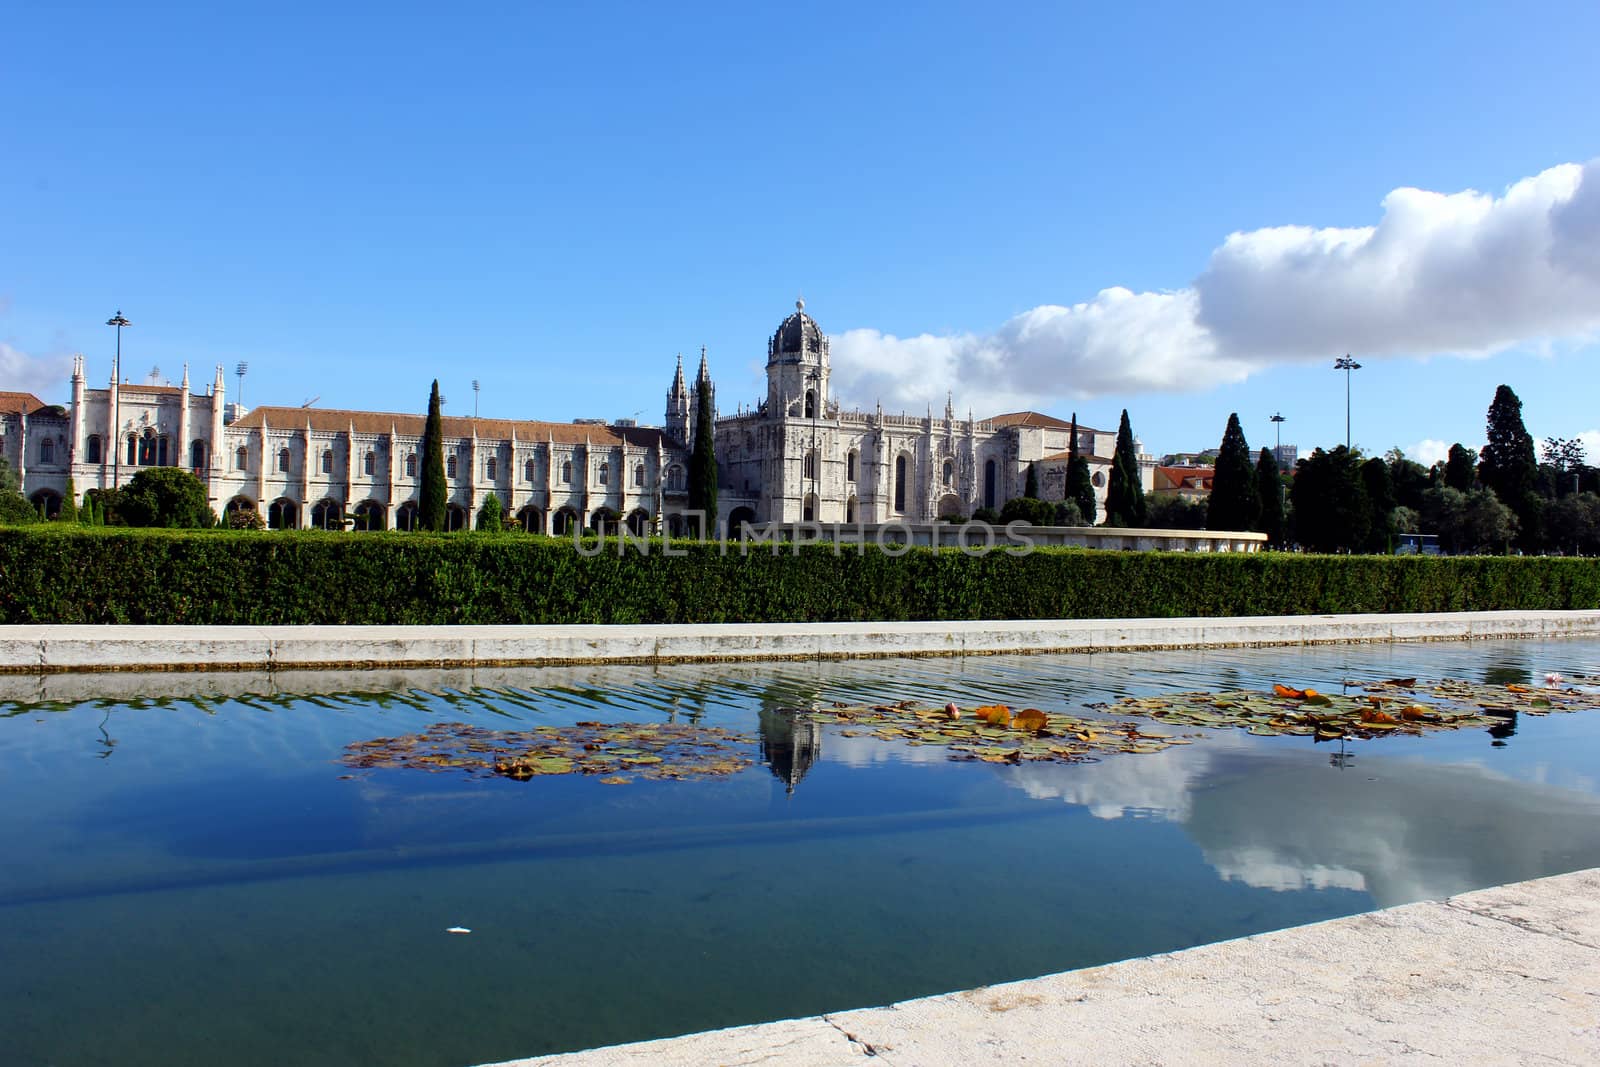 The Jerónimos Monastery is one of the most important monuments of Lisbon